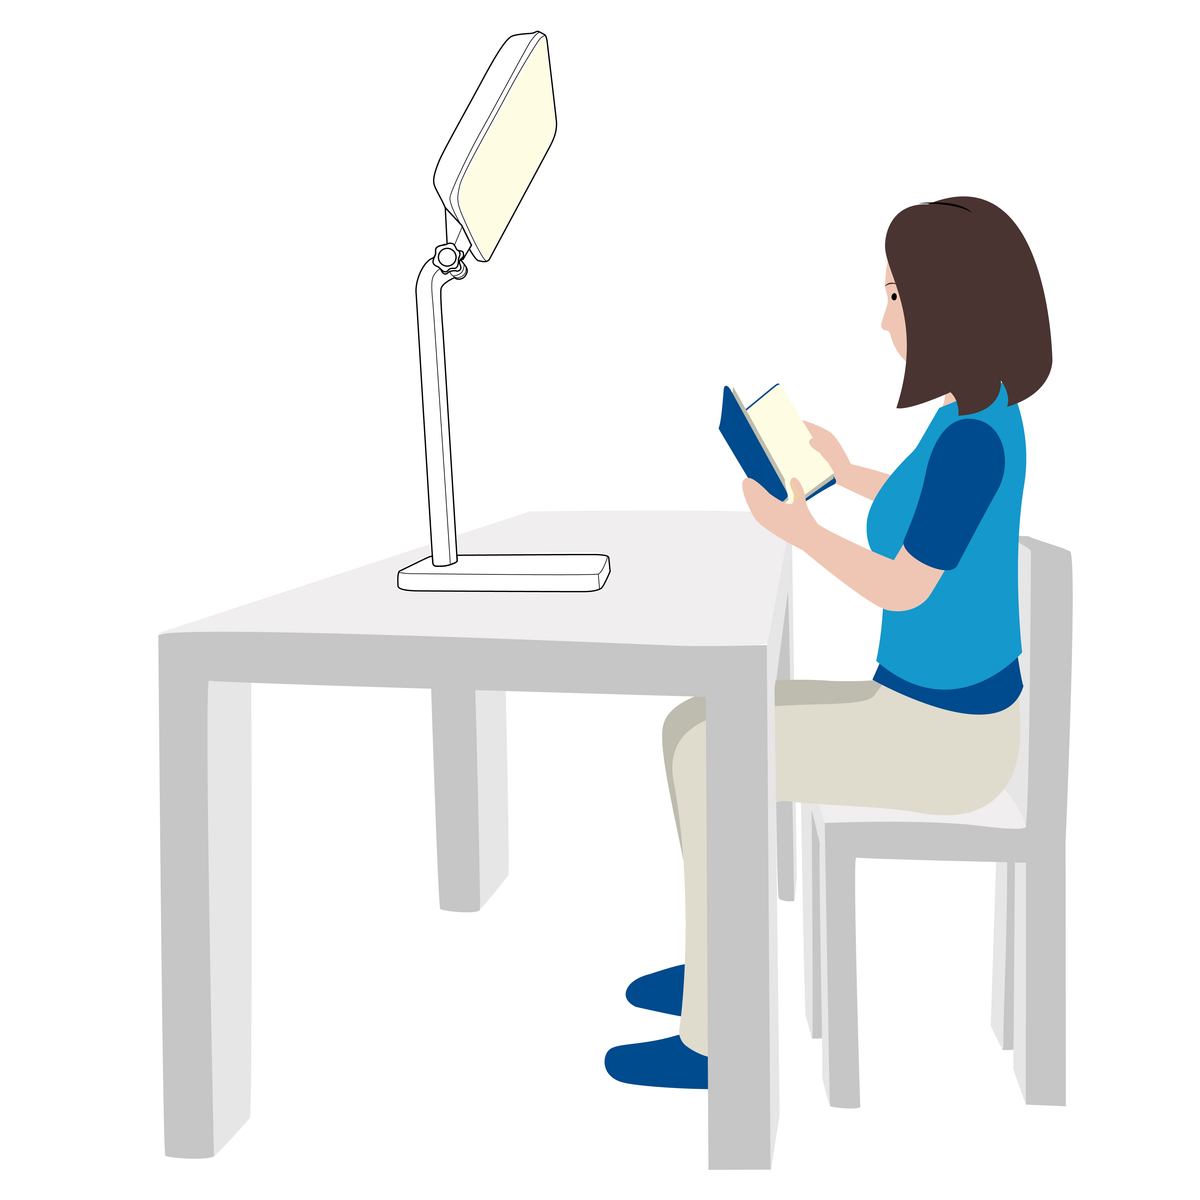 A graphic of a woman using a therapy lamp that’s too far